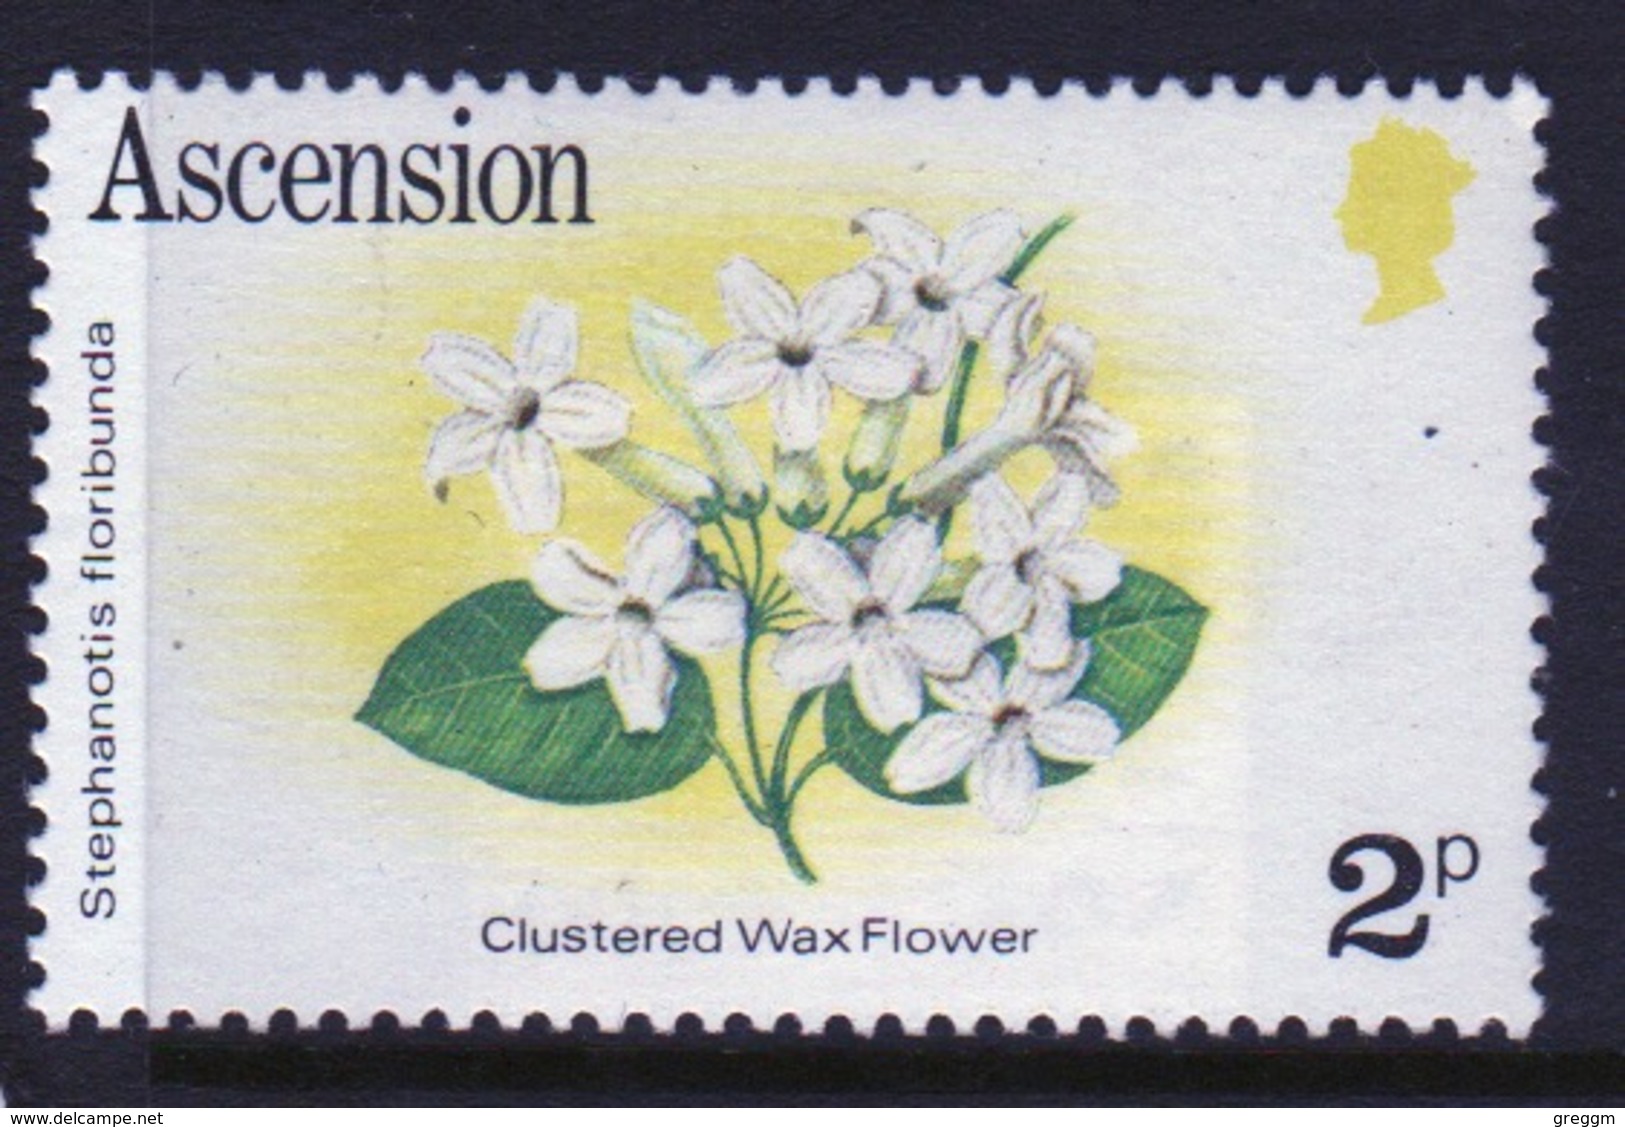 Ascension Queen Elizabeth Unmounted Mint 2p Stamp From 1981 Set On Flowers. - Ascension